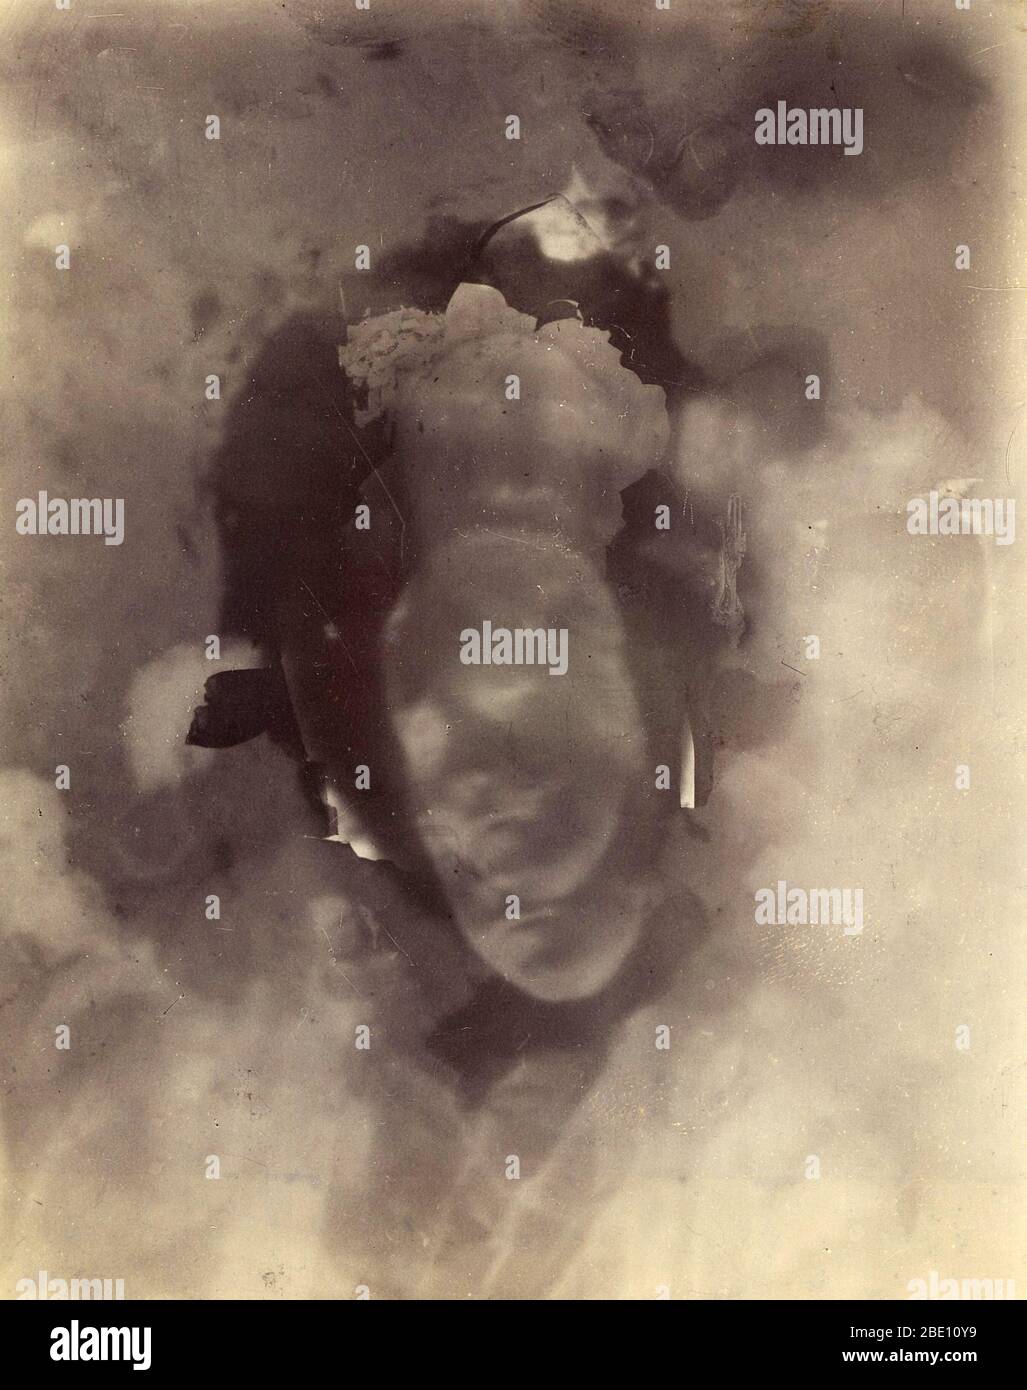 A 'Thoughtograph' or psychic photograph. Made by Charles Lacey, c. 1894-98. Albumen and gelatin silver print. A head and face can be seen in the center of this photograph, with a 'thought' emerging in a cloud above. Spirit photography became popular in the late 19th century, after some charlatans discovered that photo negatives could be doctored to show the 'hidden' element of life, including ghosts, thoughts, and souls. Stock Photo